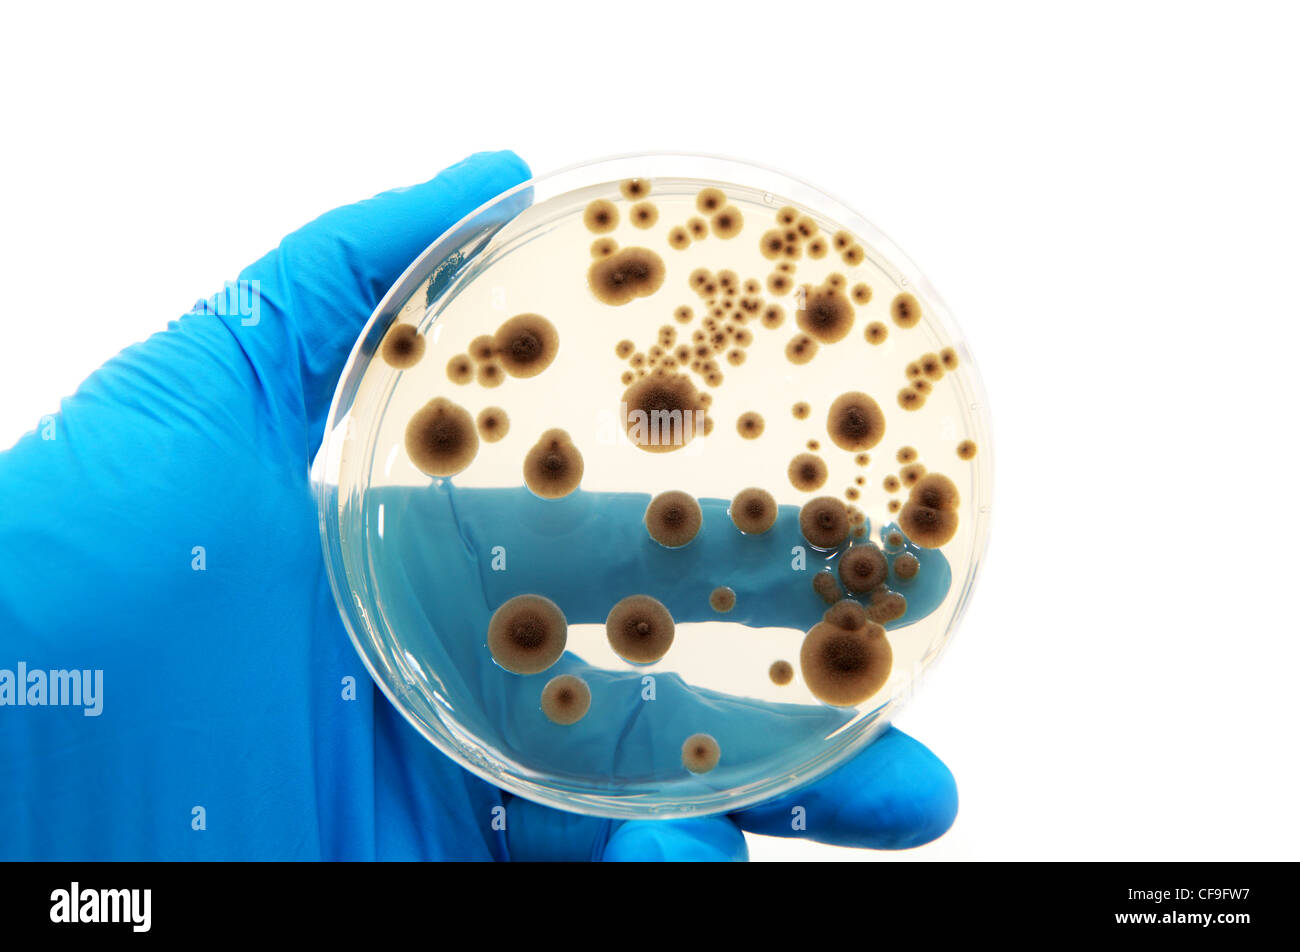 microorganisms fungi on the agar plate on white background Stock Photo